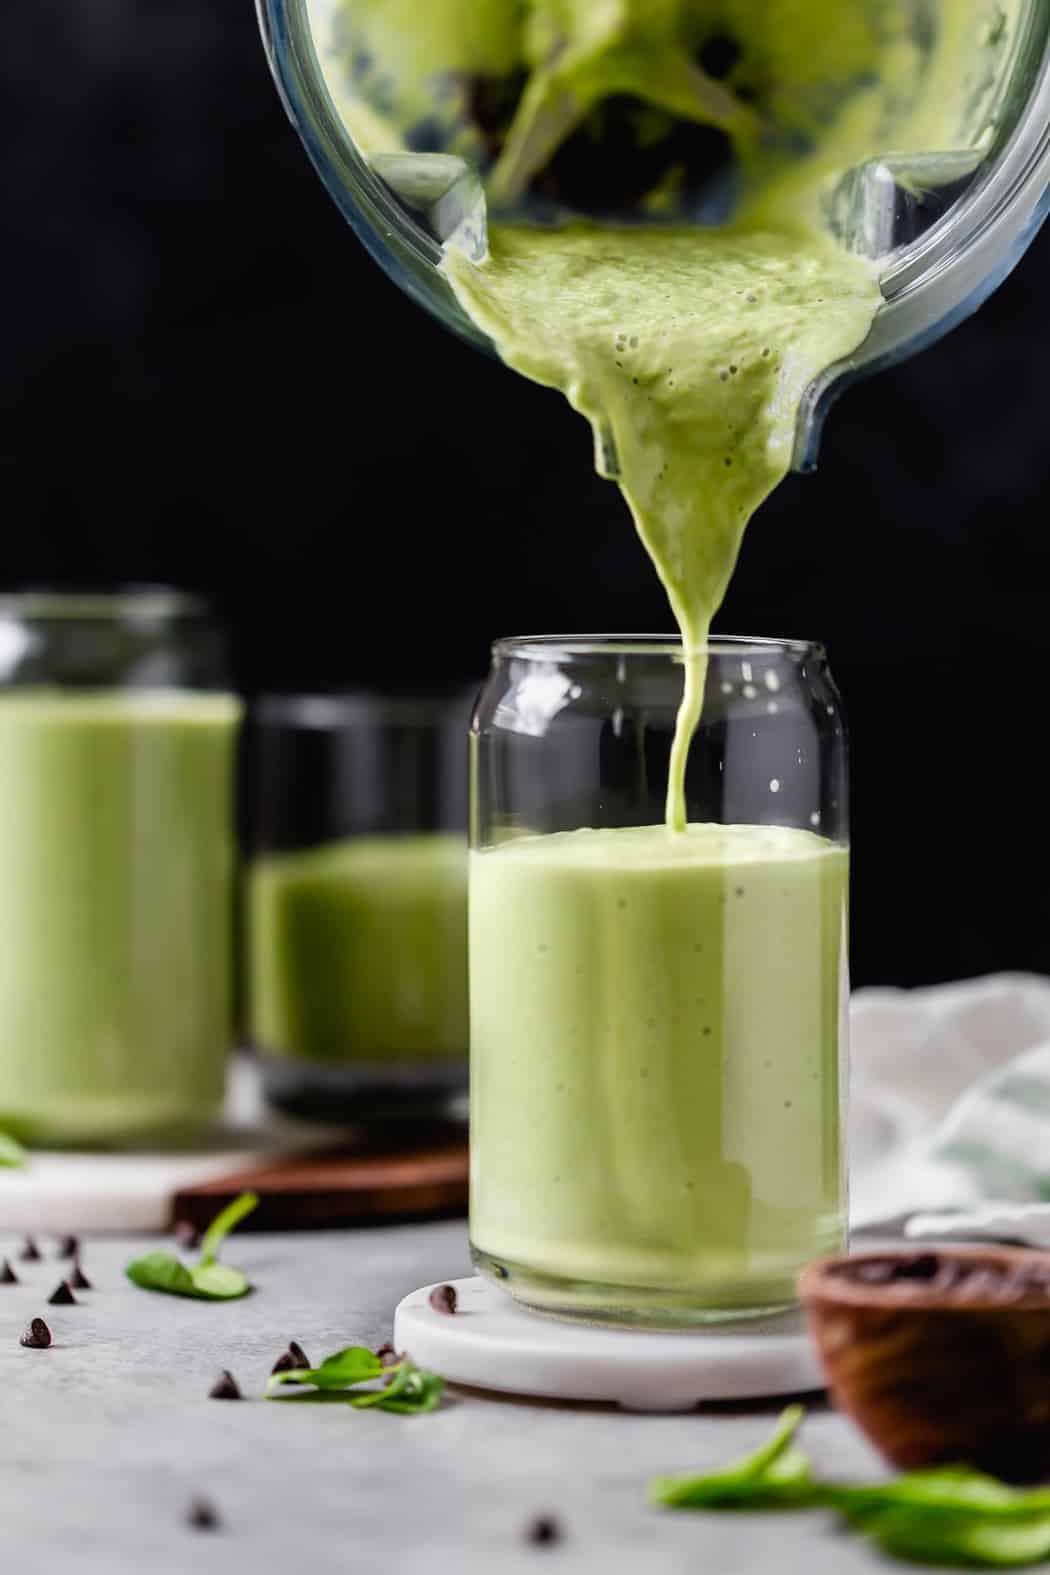 A green mint chocolate chip smoothie slowly being poured into glass cups